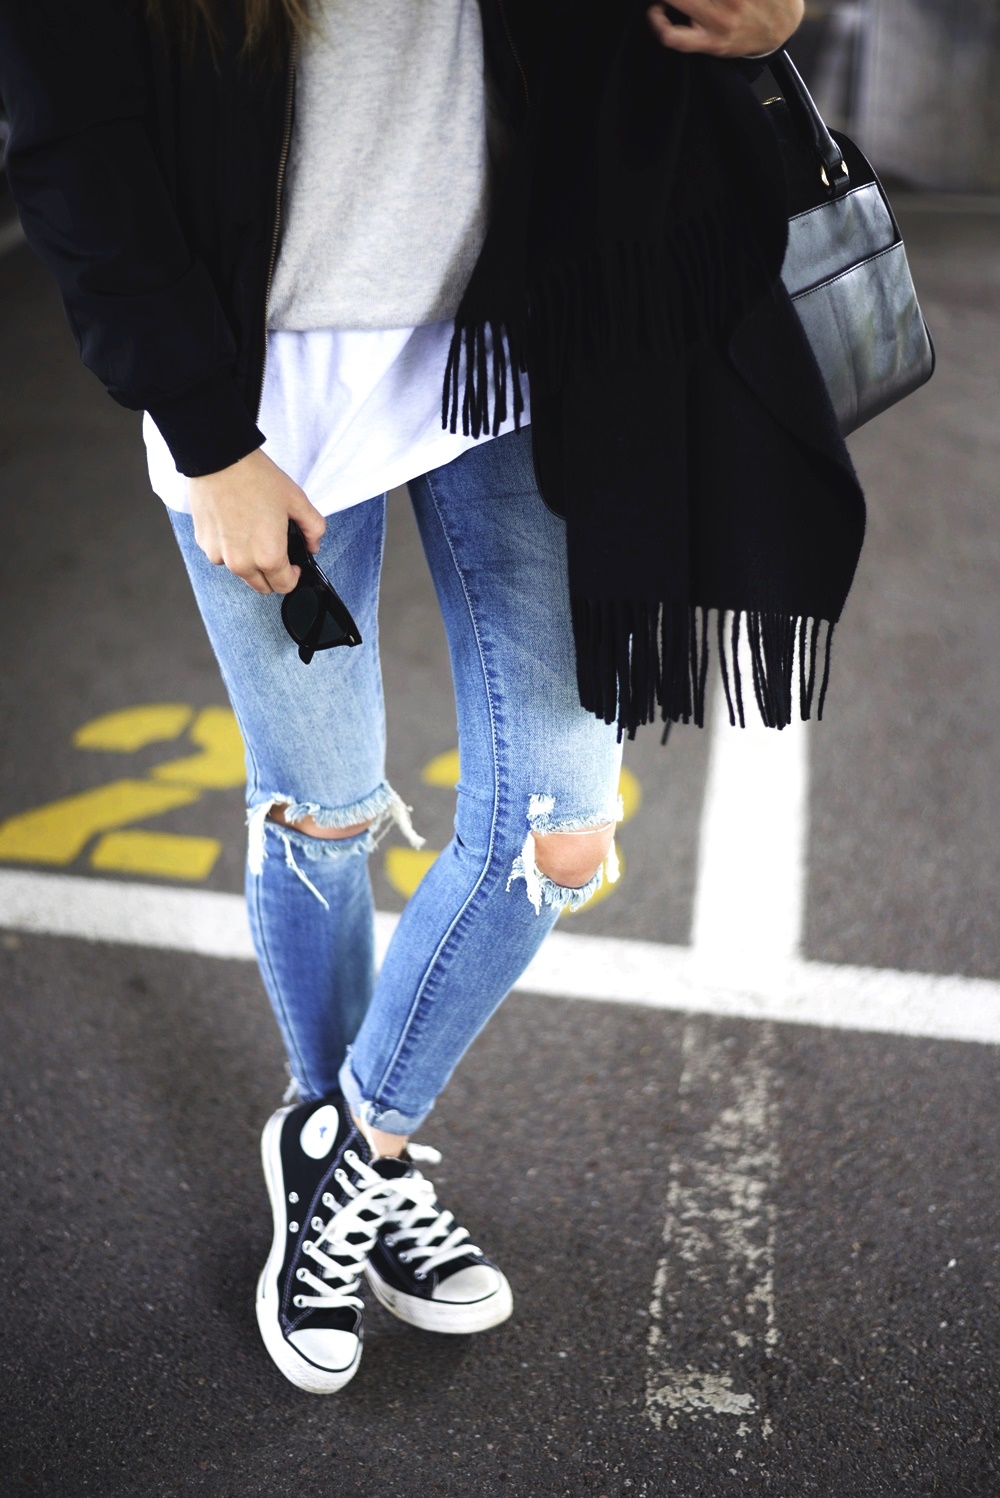 Blue Jeans & Bomber Jacket | BY ANNA: Fashion and Lifestyle Blog from ...